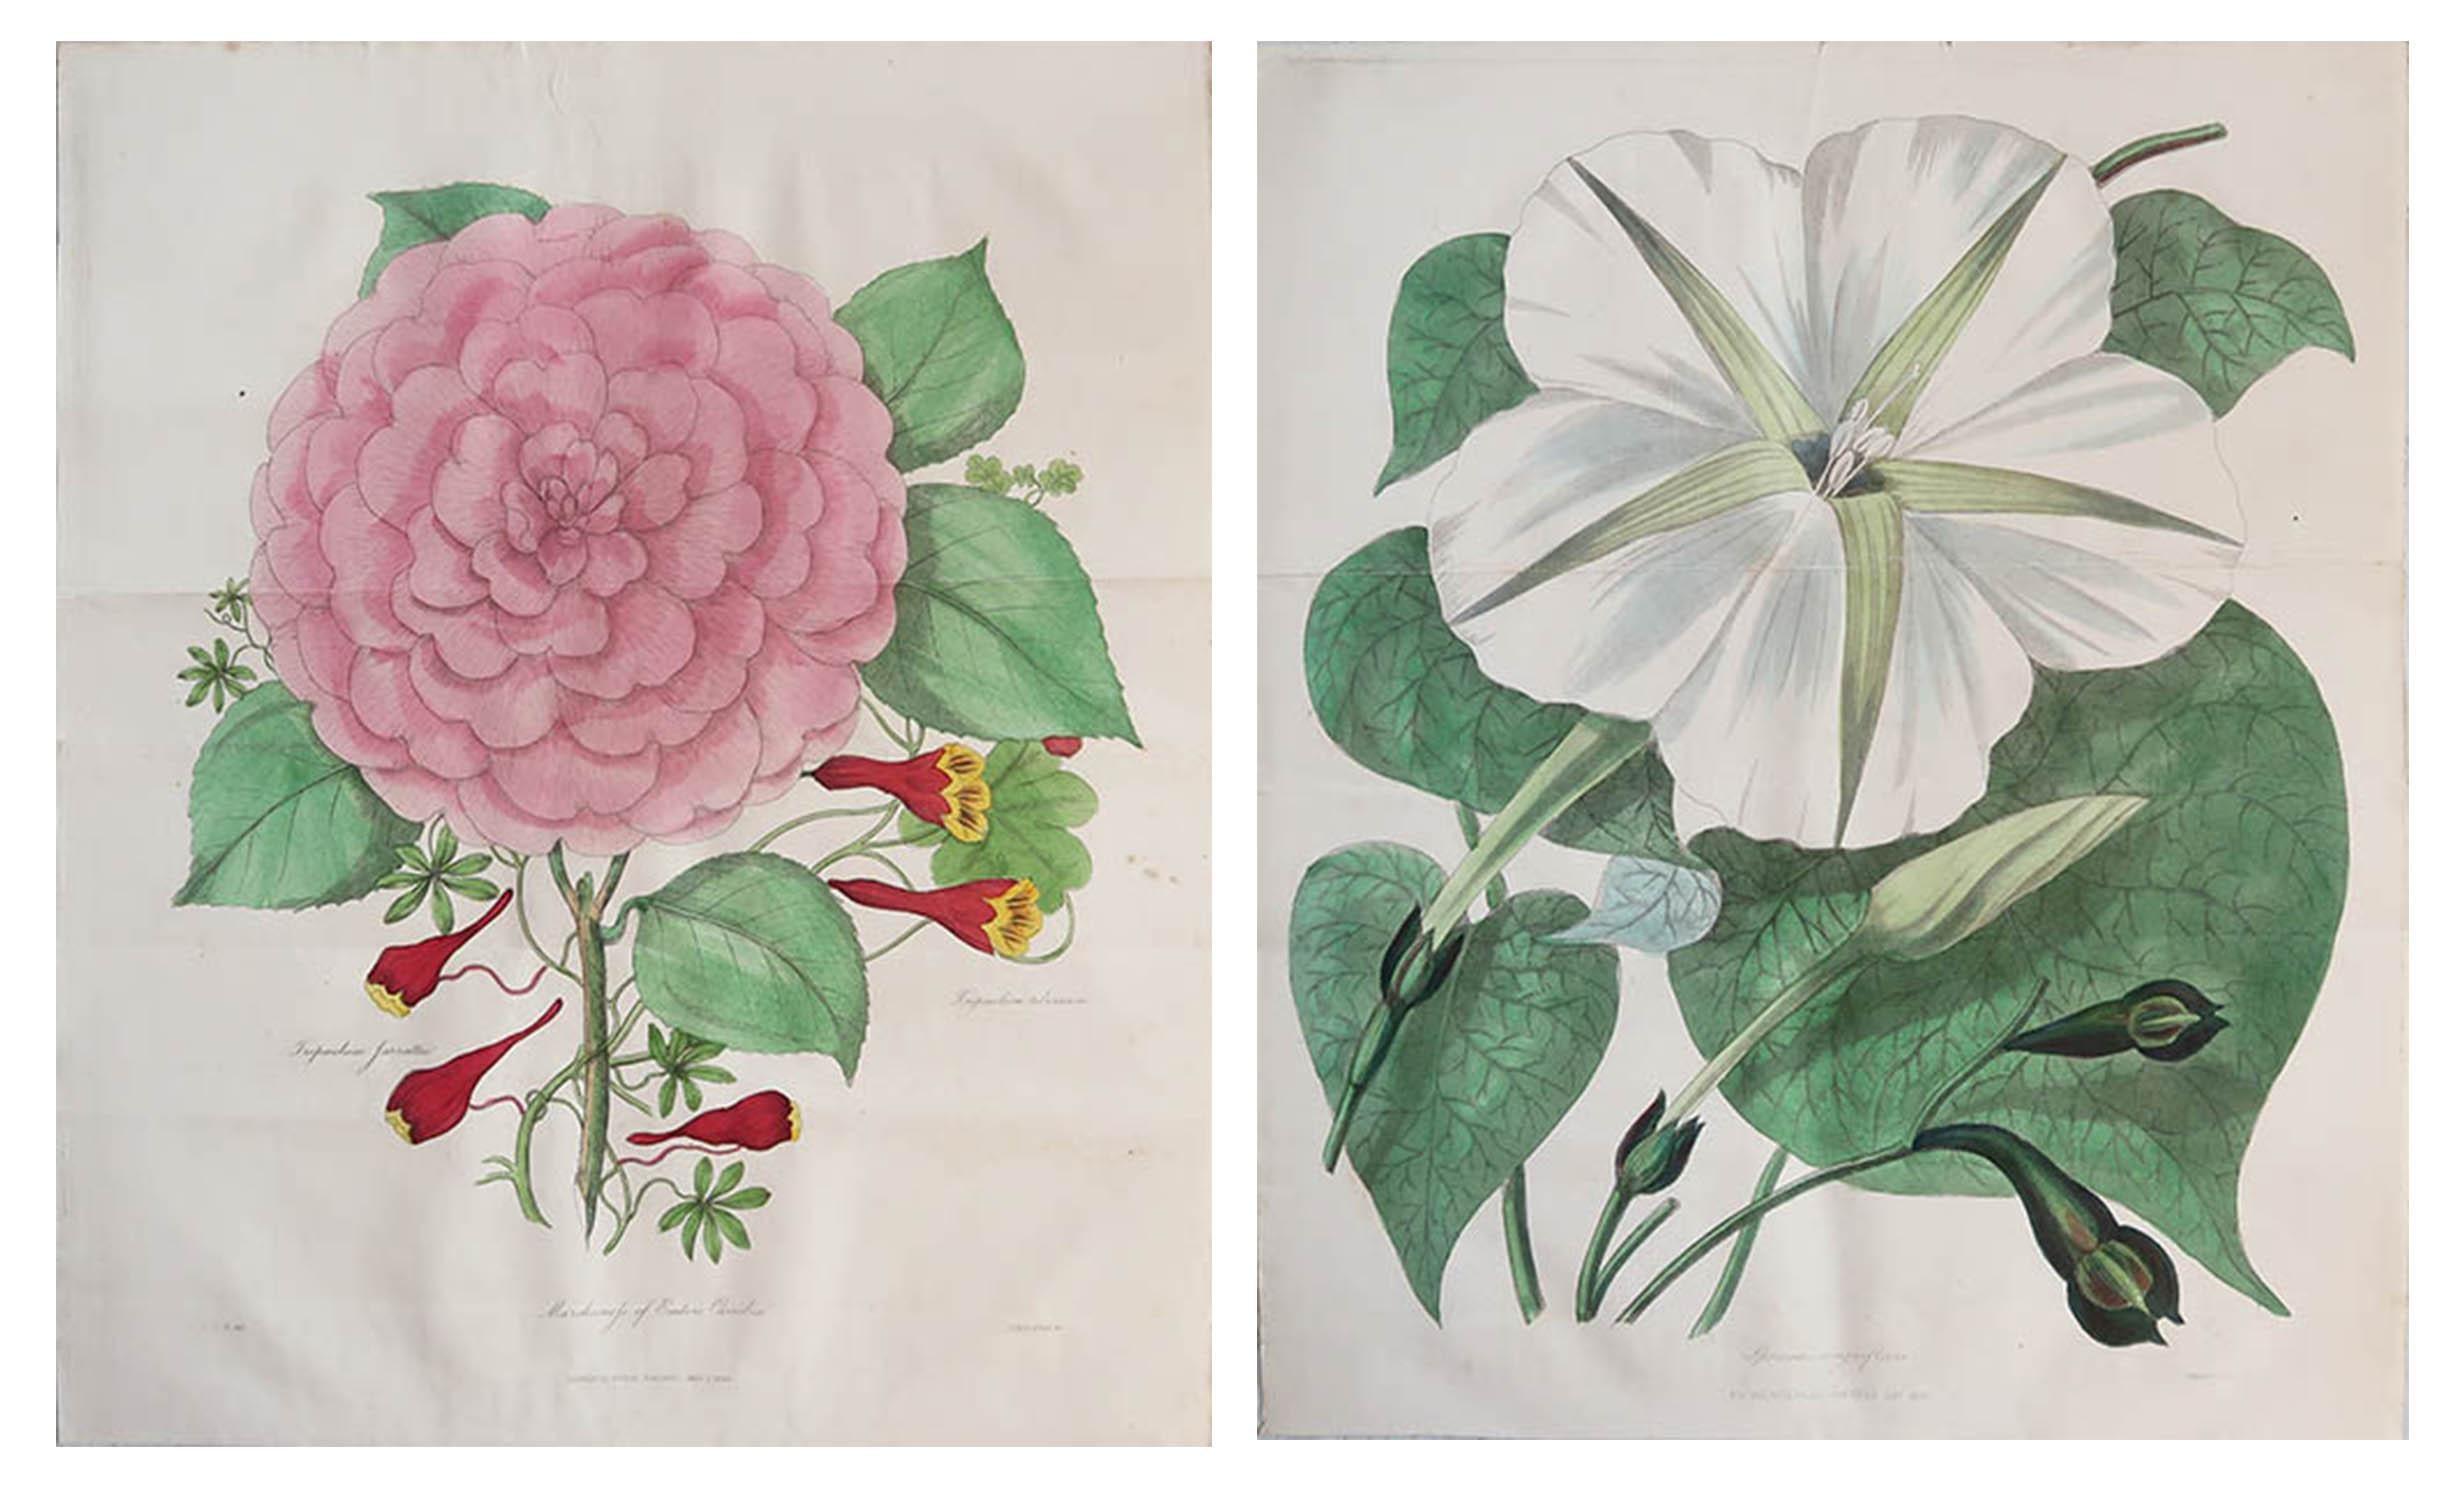 Wonderful pair of botanical prints.

Lithographs by Alfred Adlard

After C.W Harrison

Original hand color

Published, 1838

Unframed.

The measurement given is for one print.

